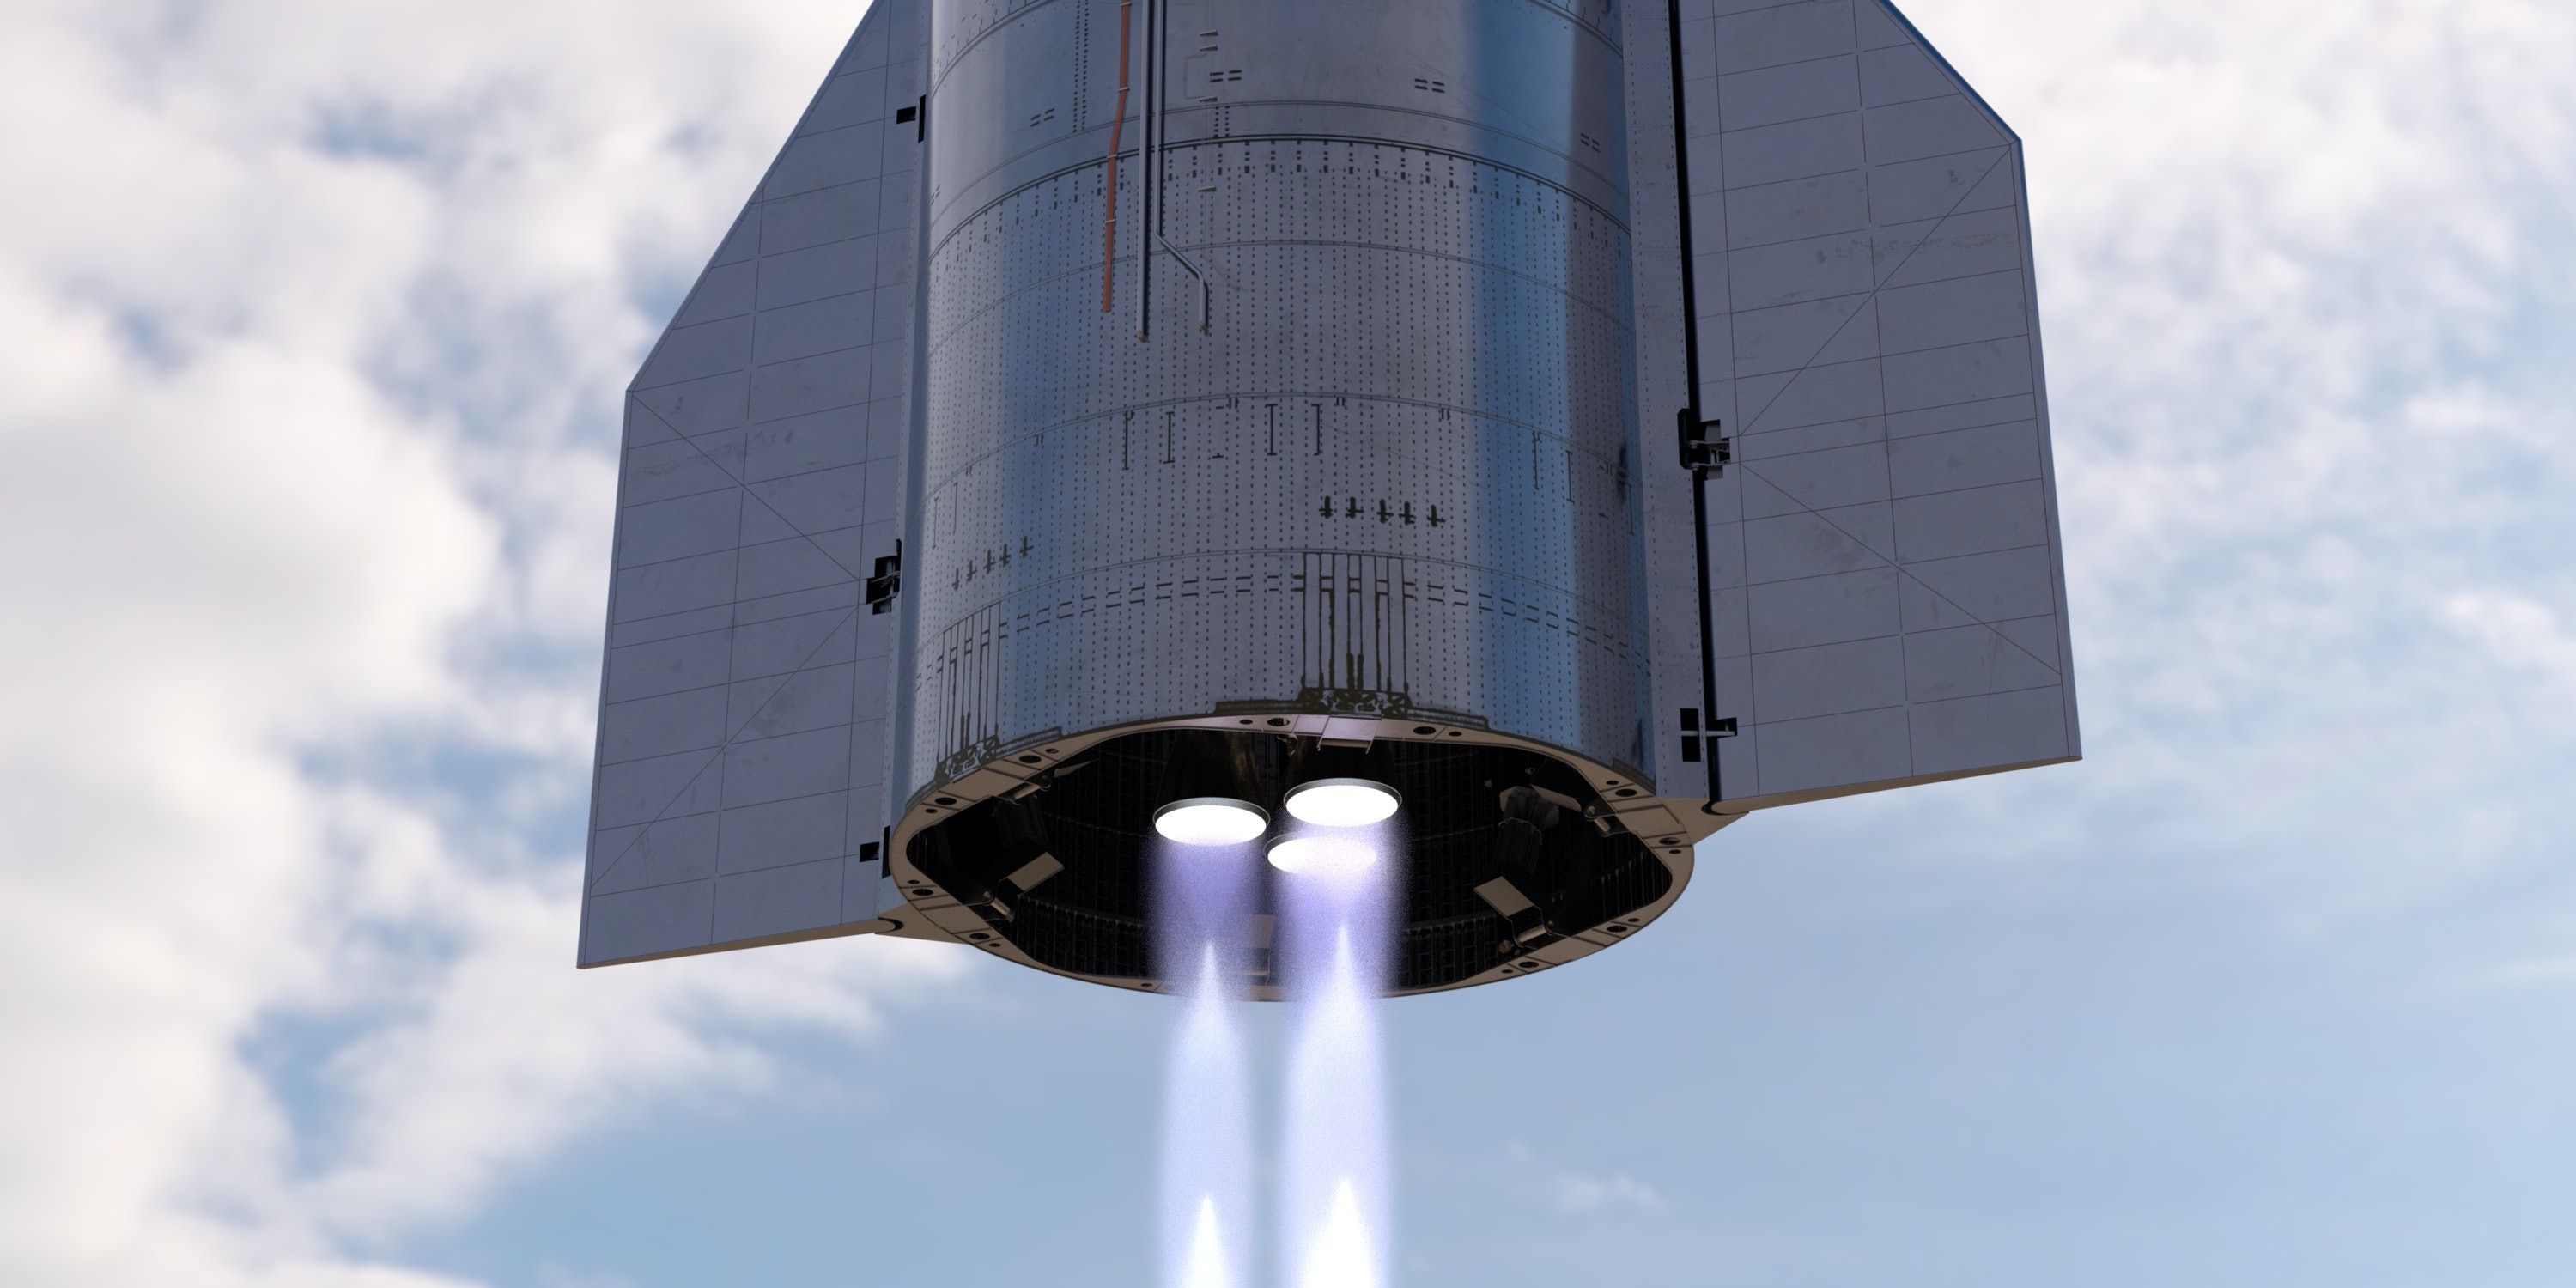 Spacex Starship Wallpaper 4k - IMAGESEE